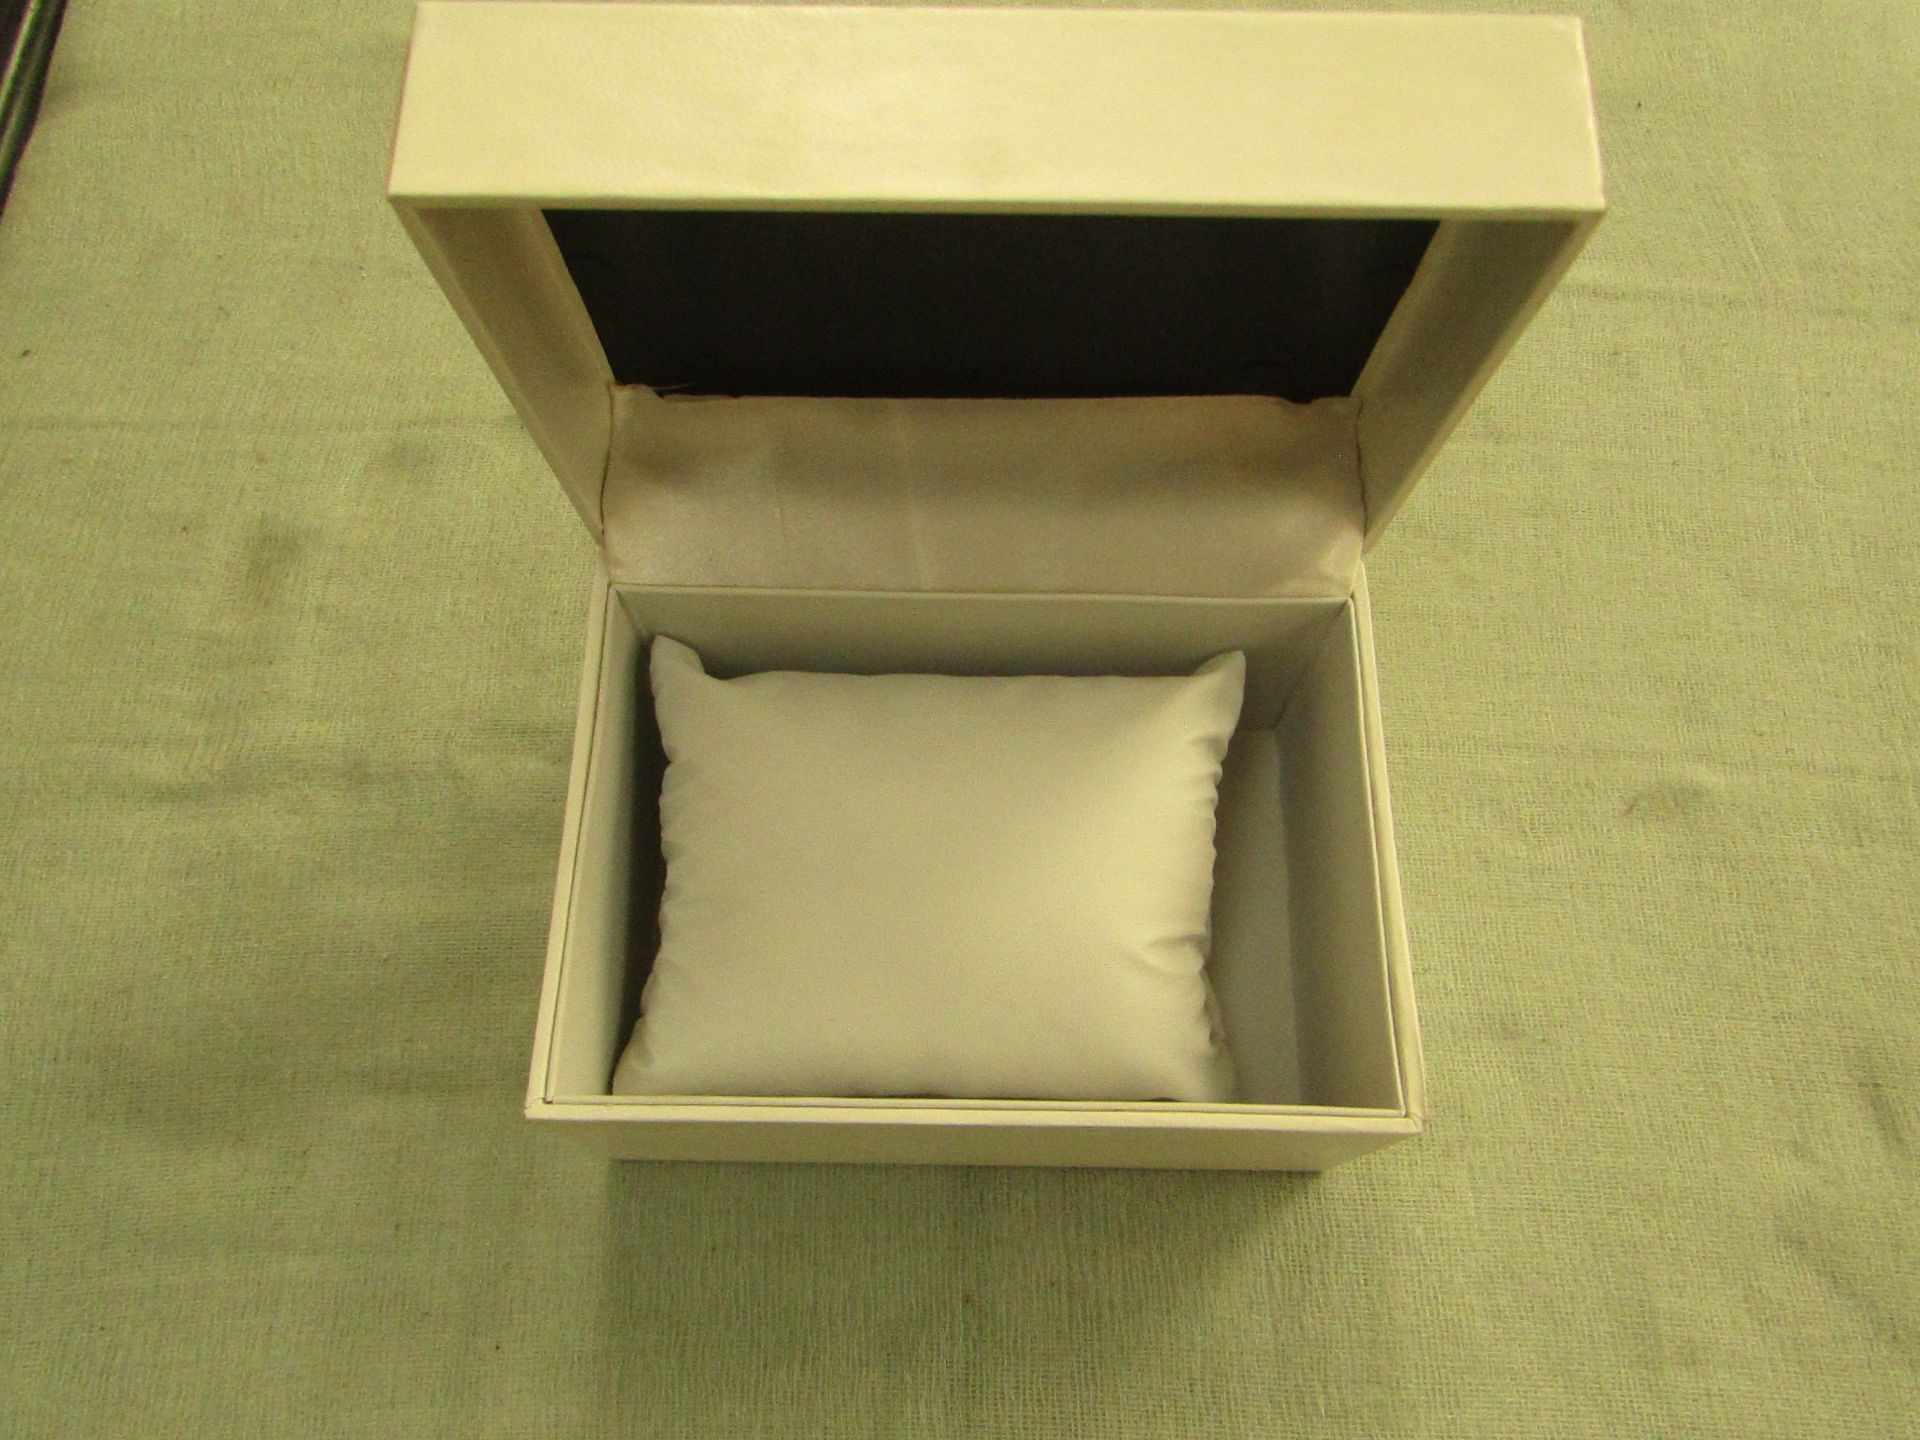 5x Unbranded - White Jewellery / Watch Boxes - All Unused.